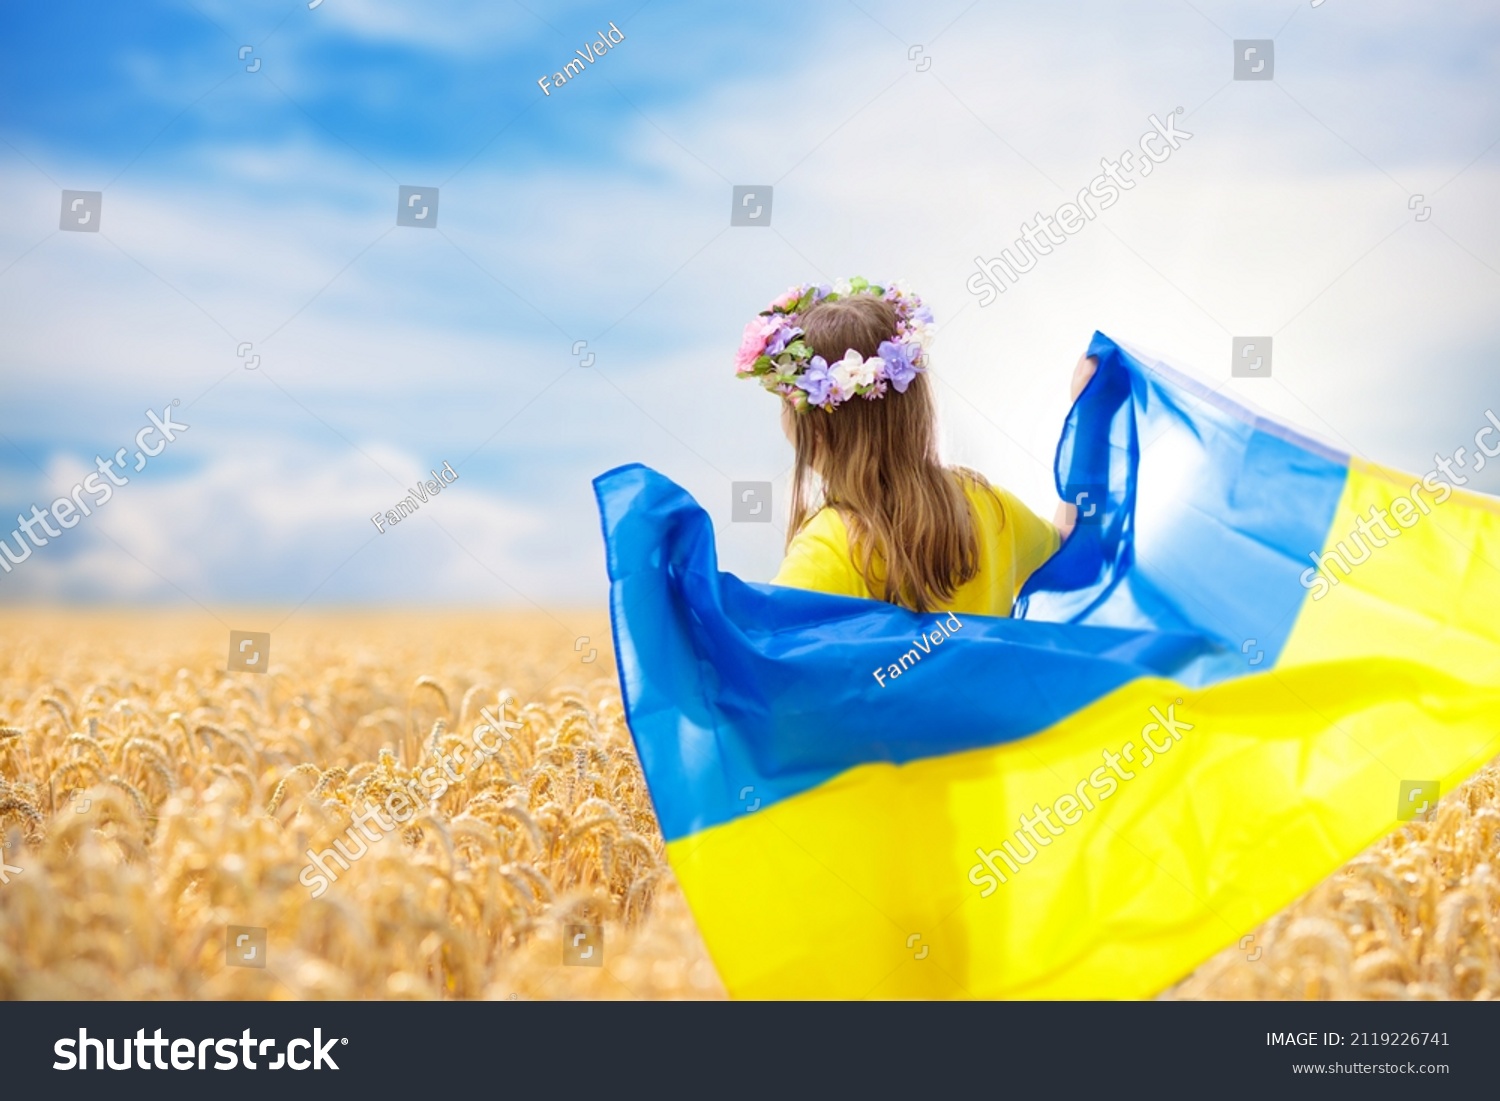 Pray for Ukraine. Child with Ukrainian flag in wheat field. Little girl waving national flag praying for peace. Happy kid celebrating Independence Day. #2119226741